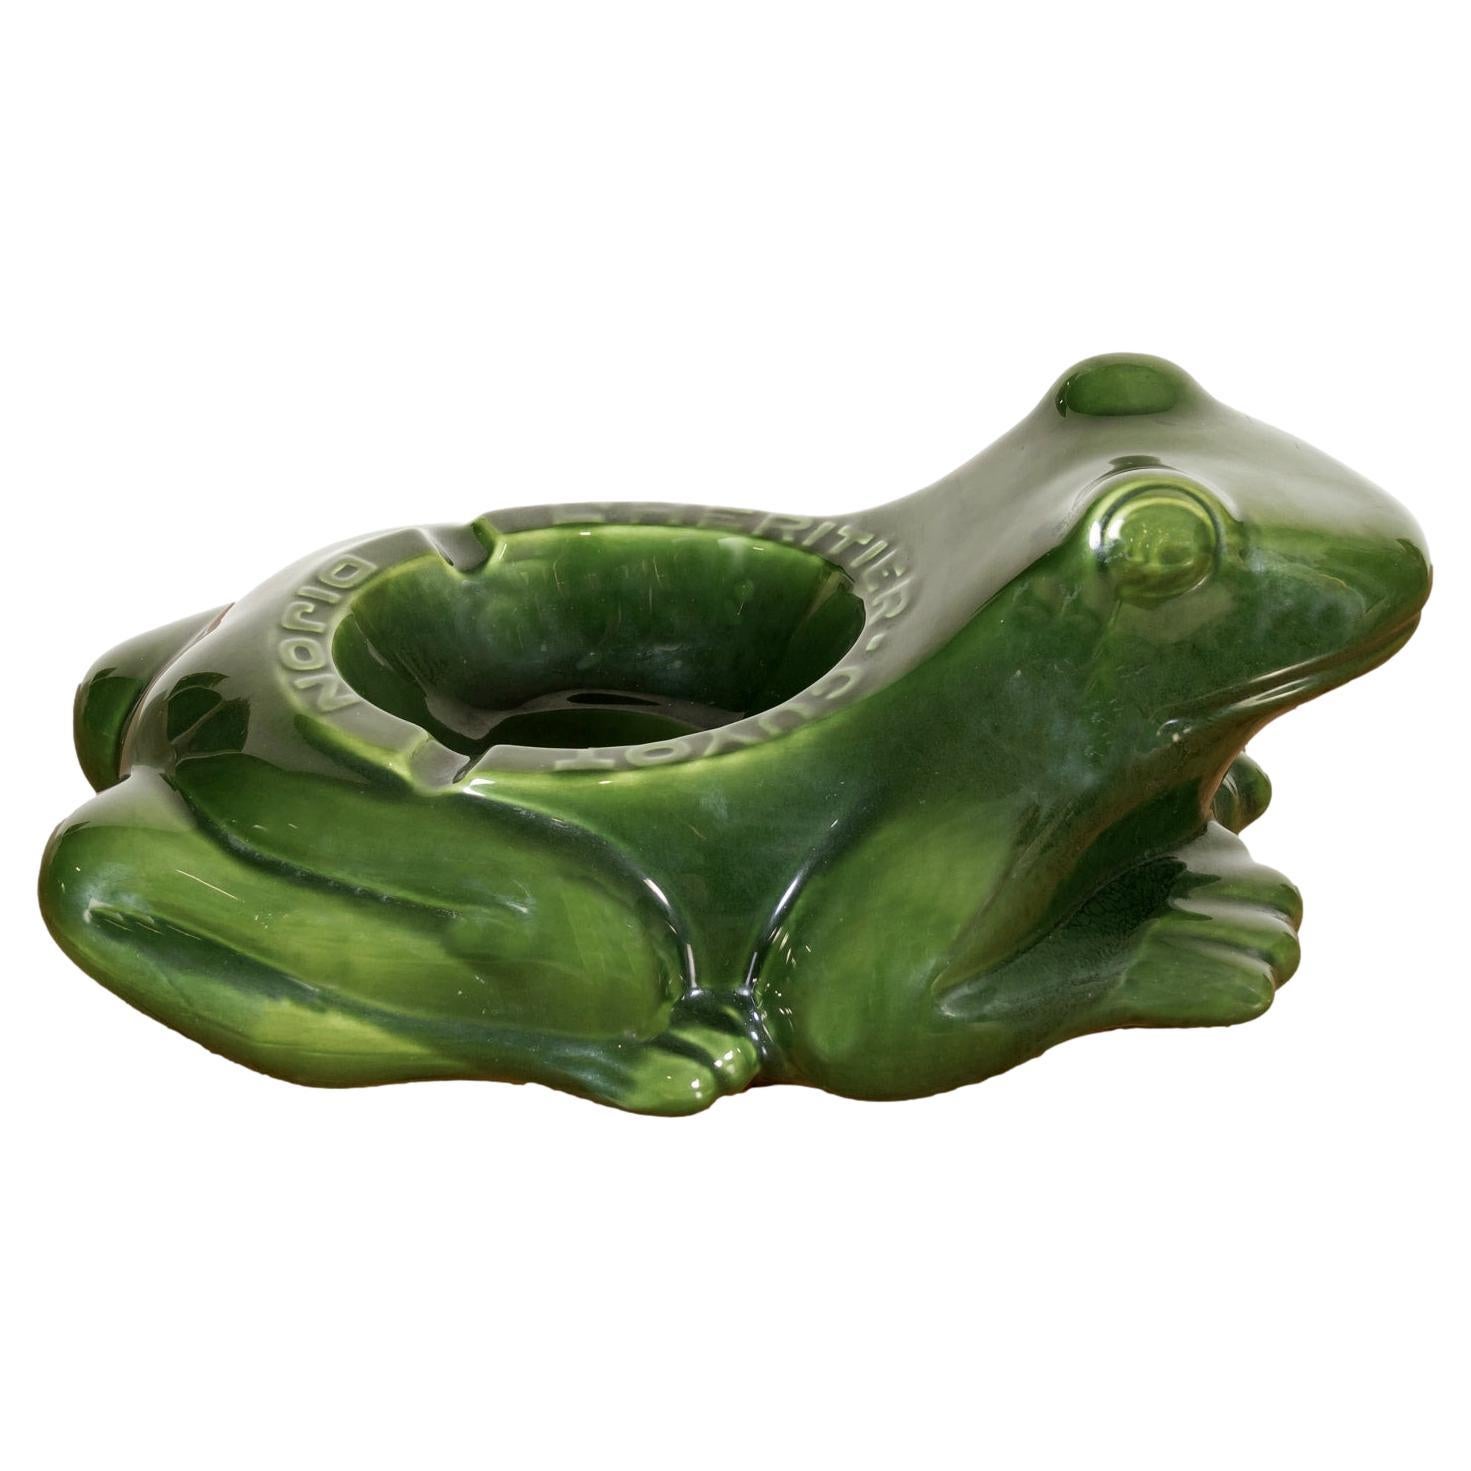 Large Vintage French L'HERITIER GUYOT DIJON Green Ceramic Frog Ad Ashtray For Sale